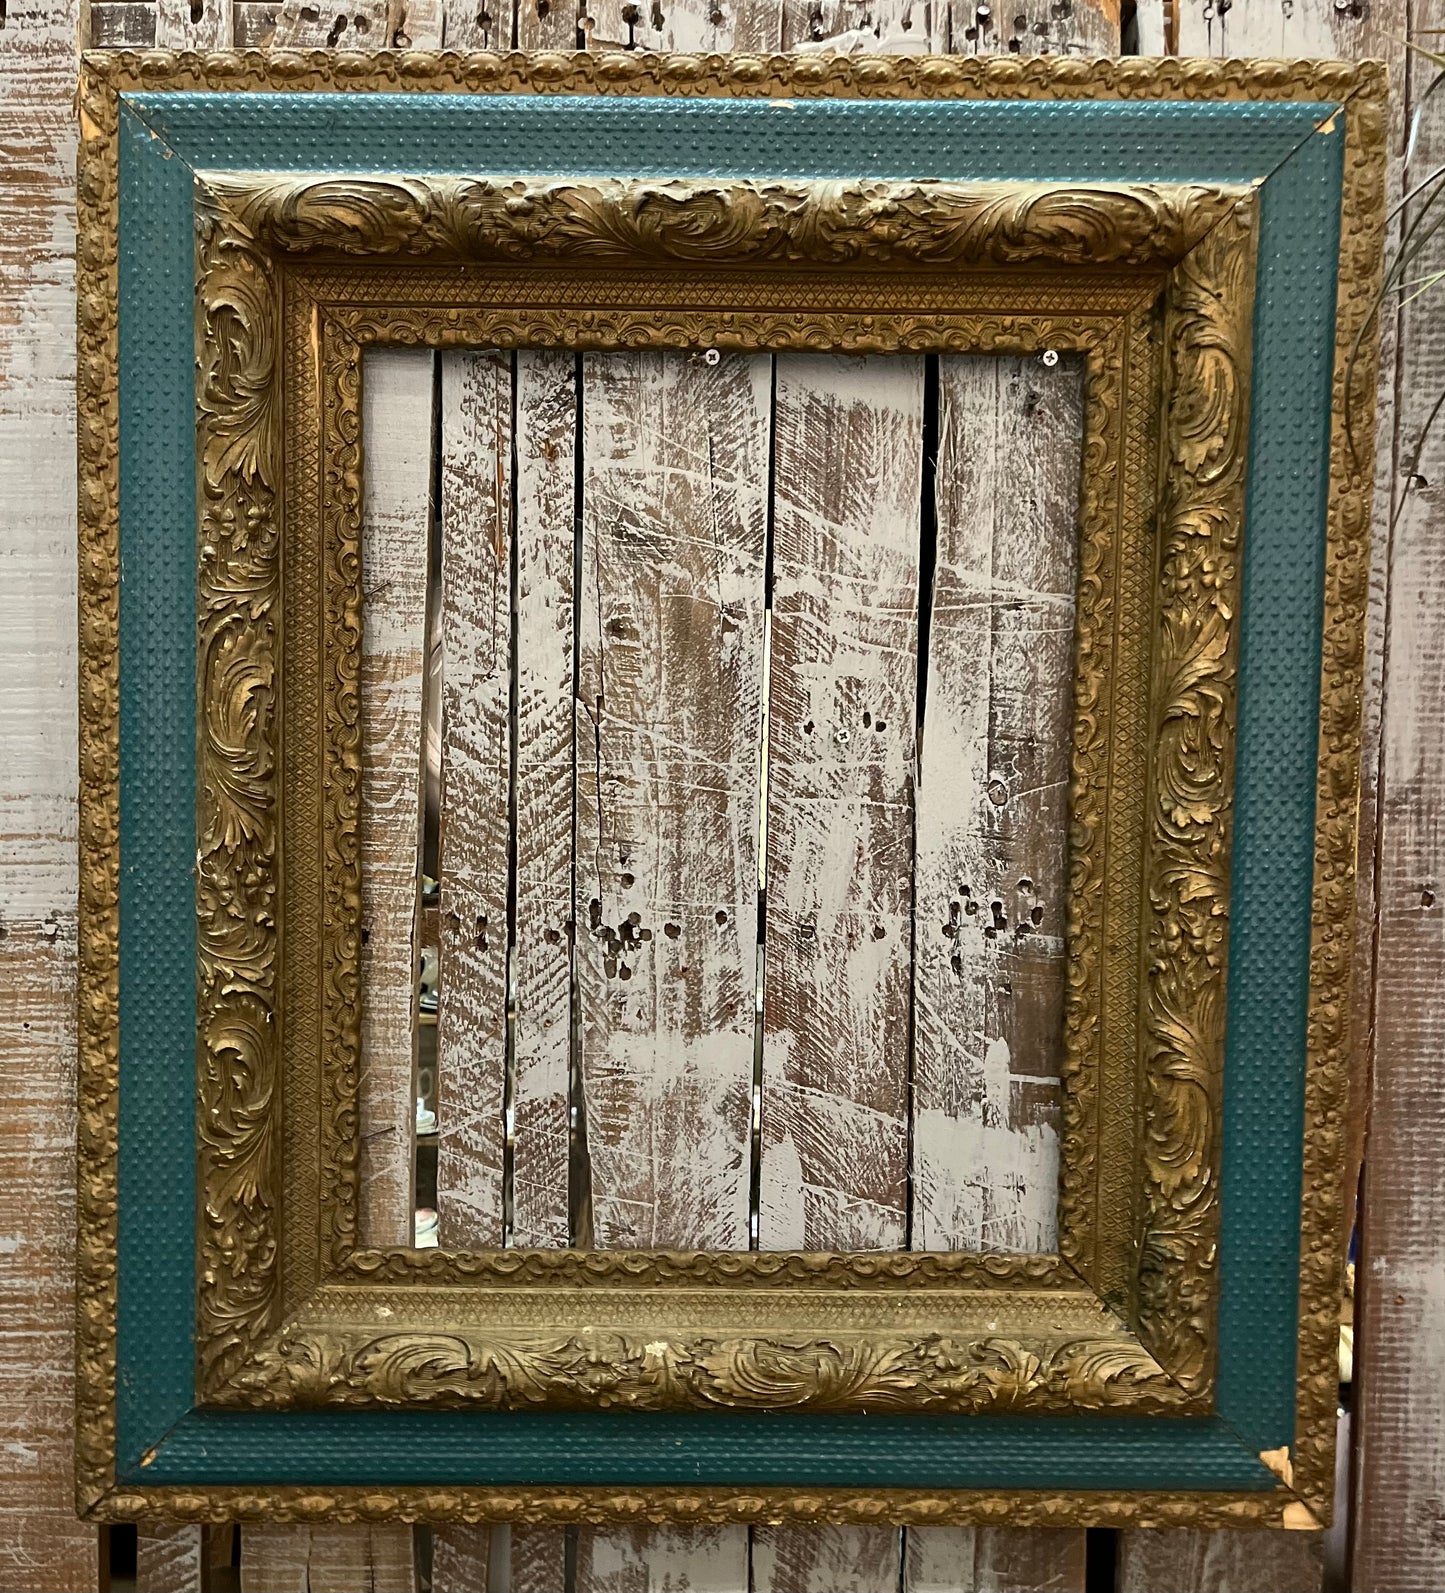 Gold & Turquoise Frame